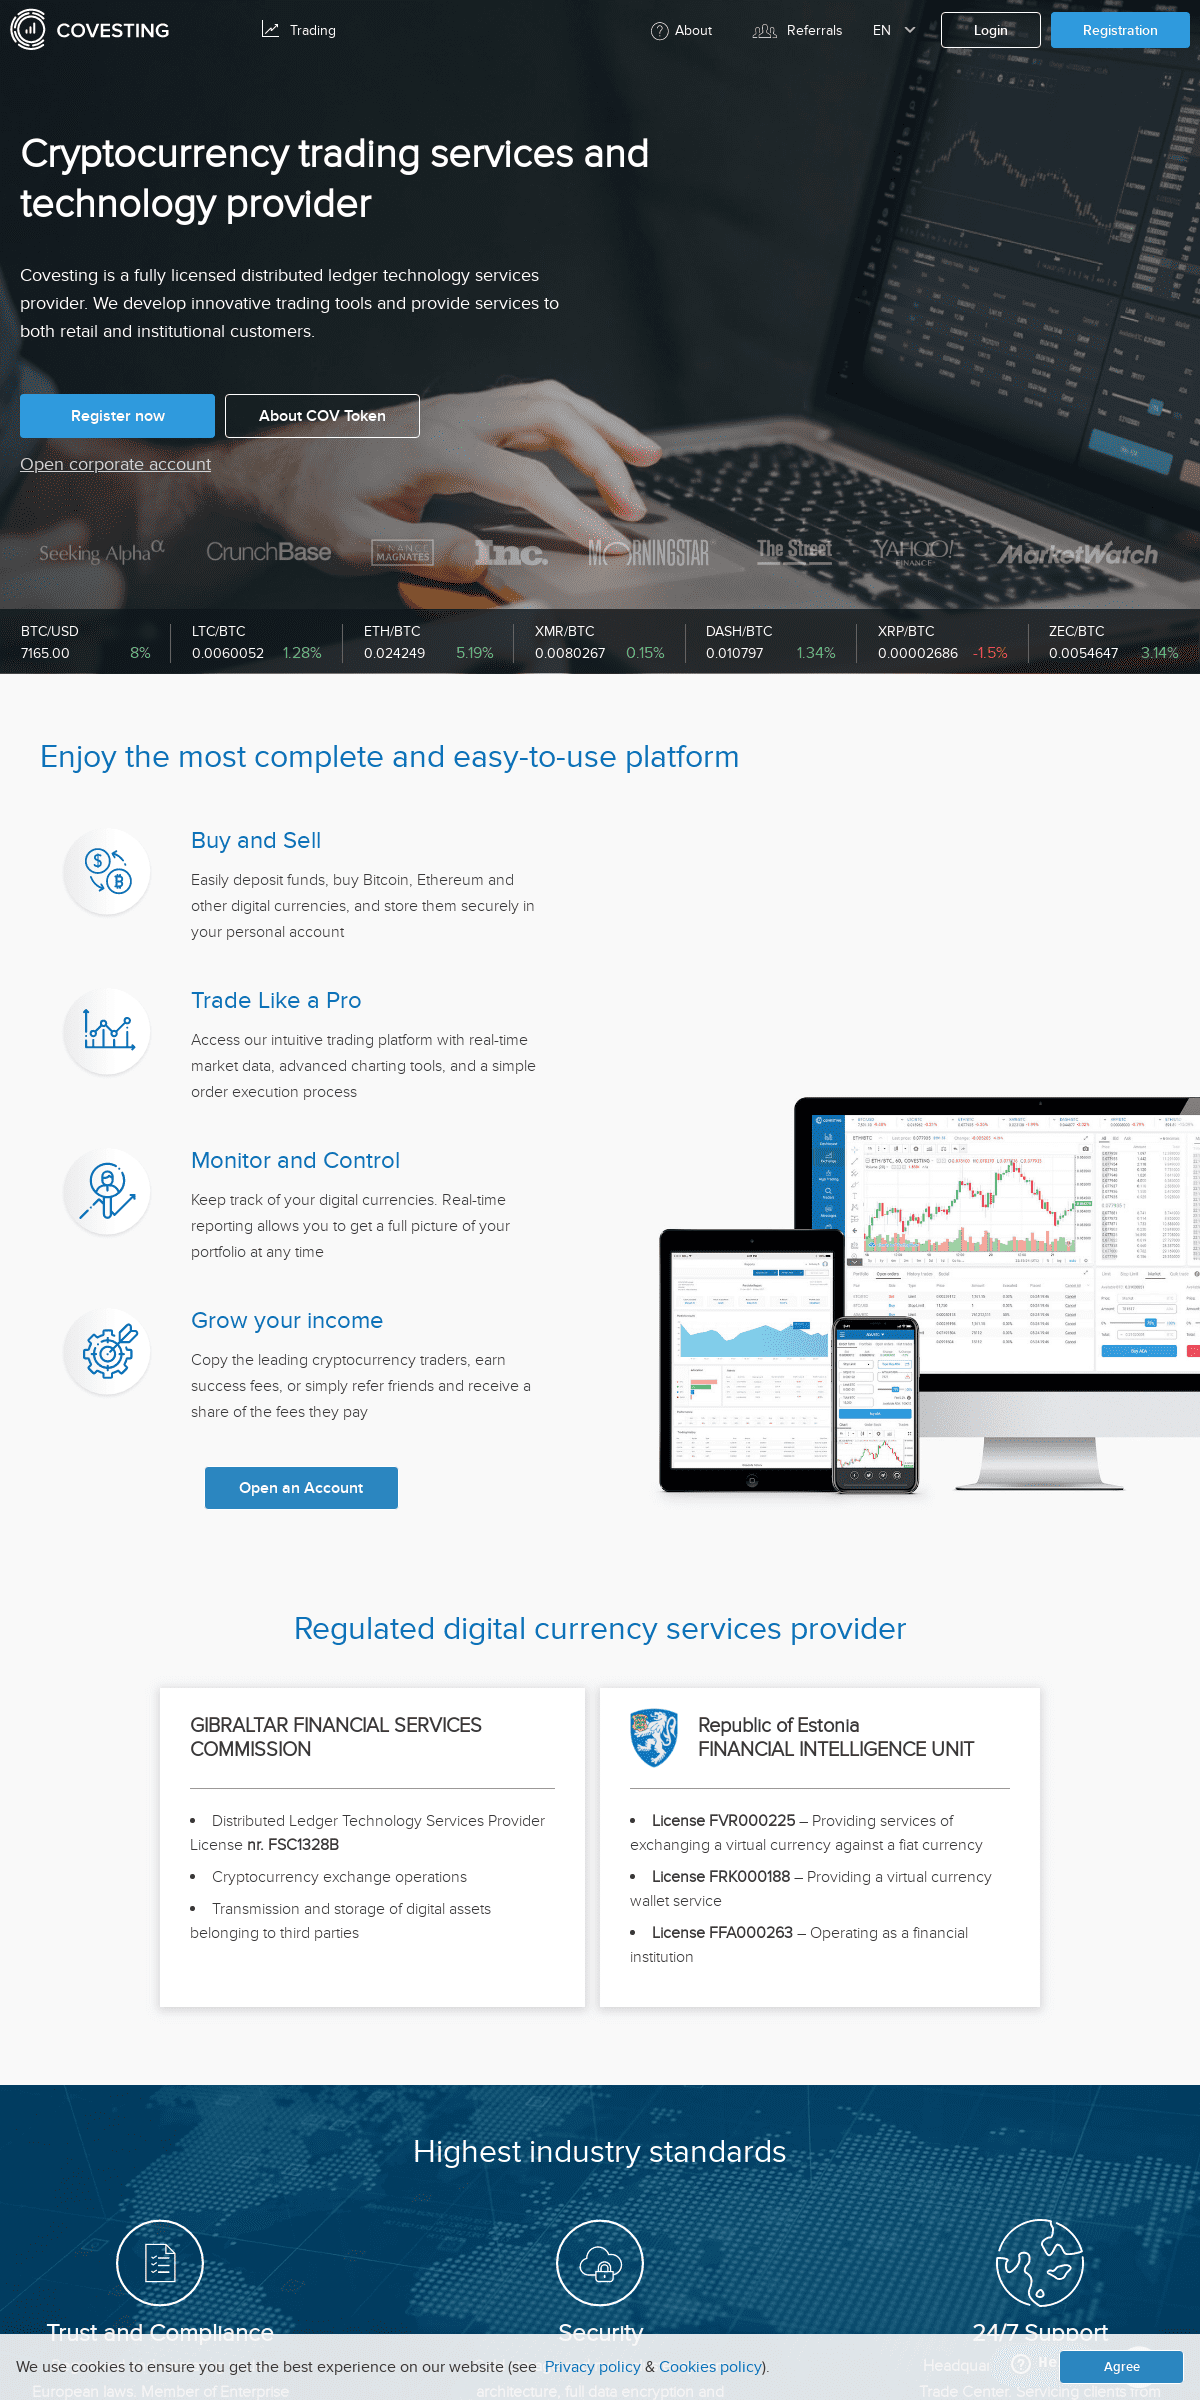 A complete backup of covesting.io